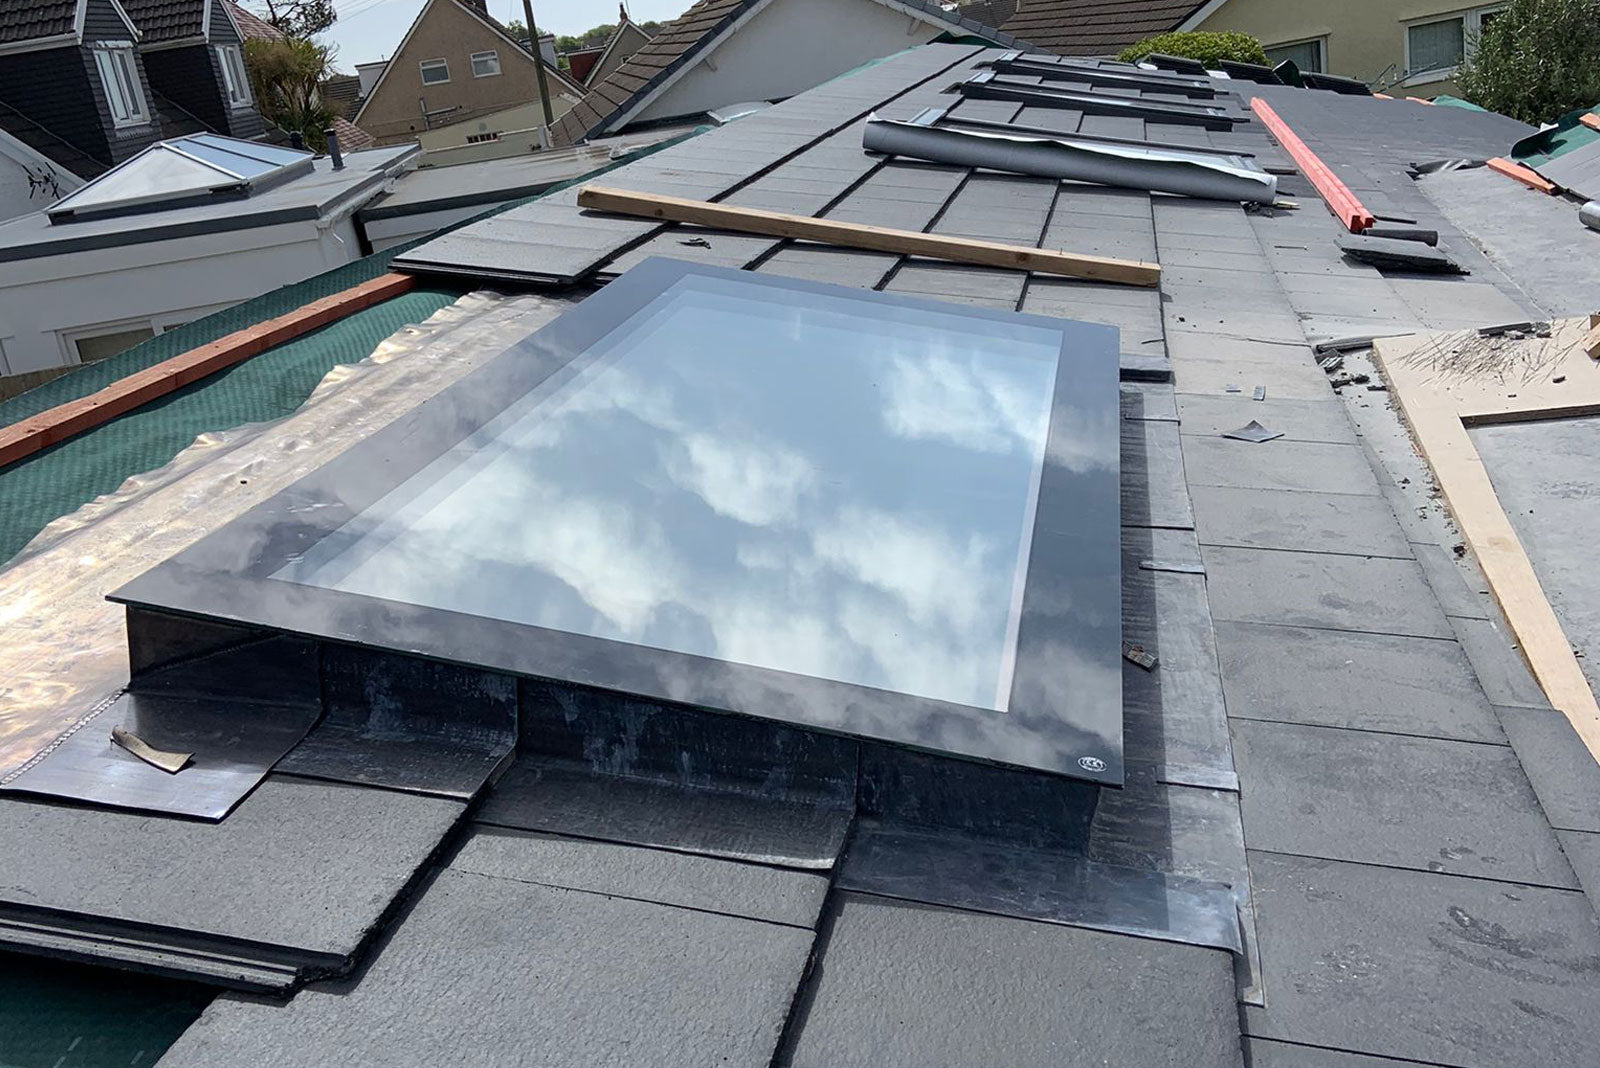 Pitched Roof Skylight 800 x 1000mm